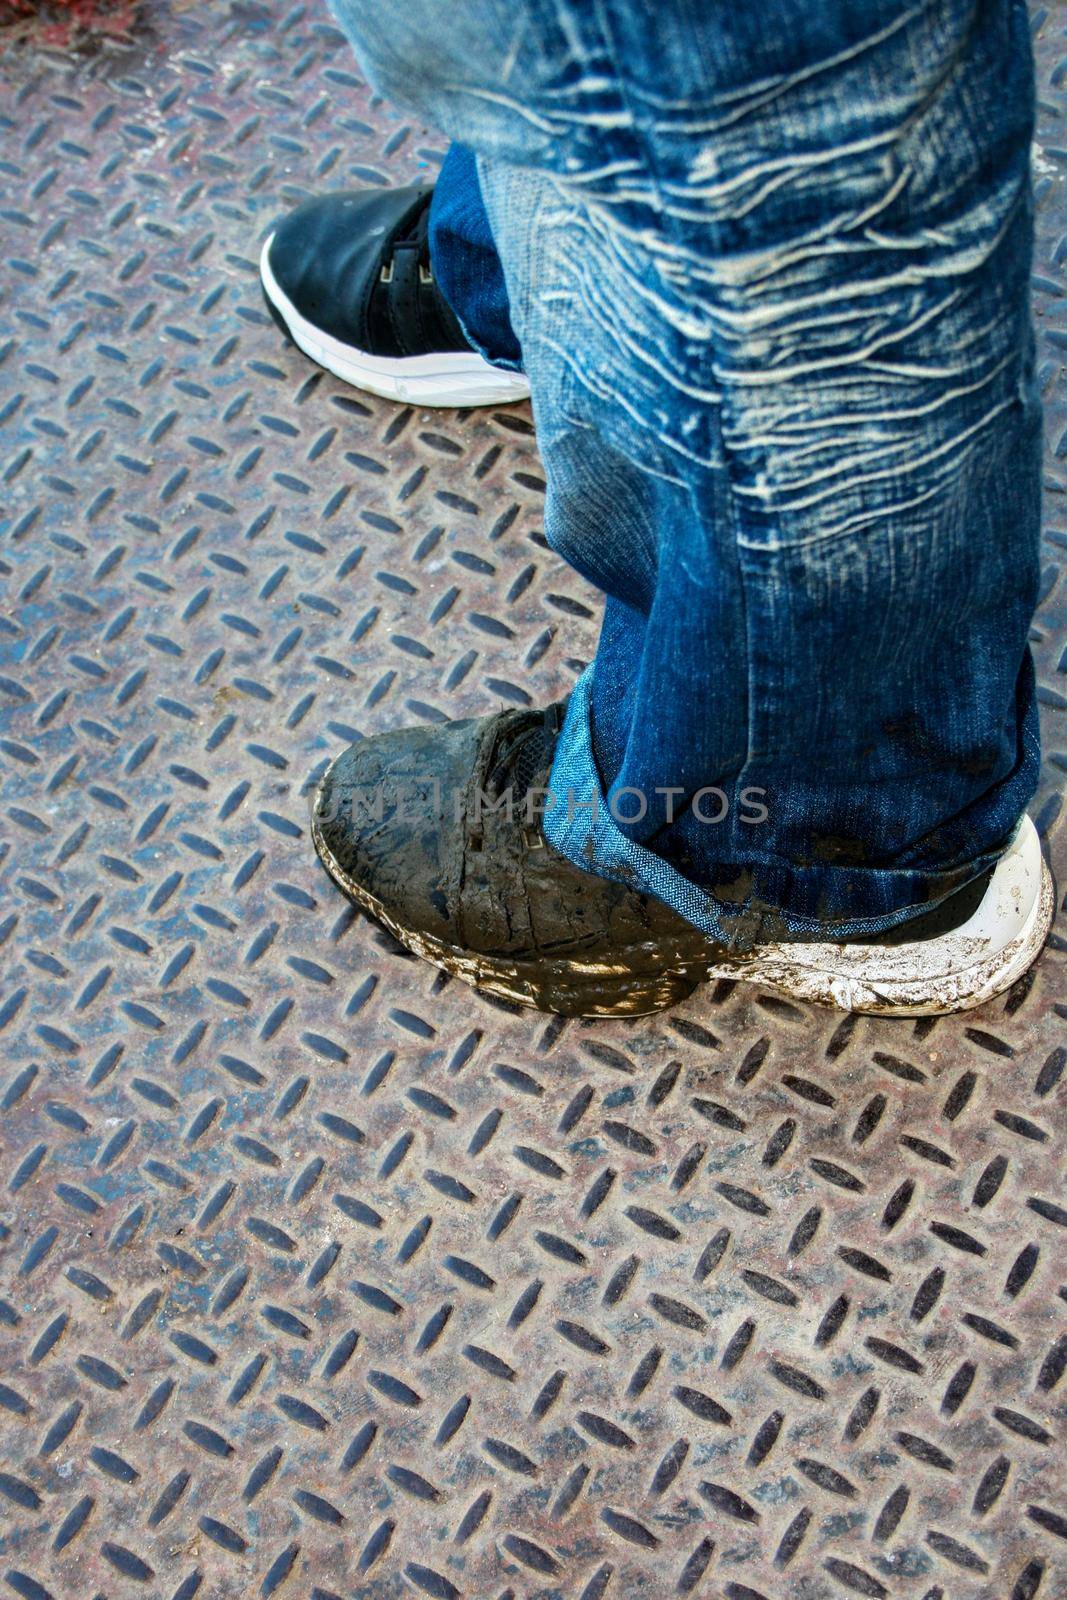 Photo of a dirty pair of tennis shoes and the bottom of a blue jean